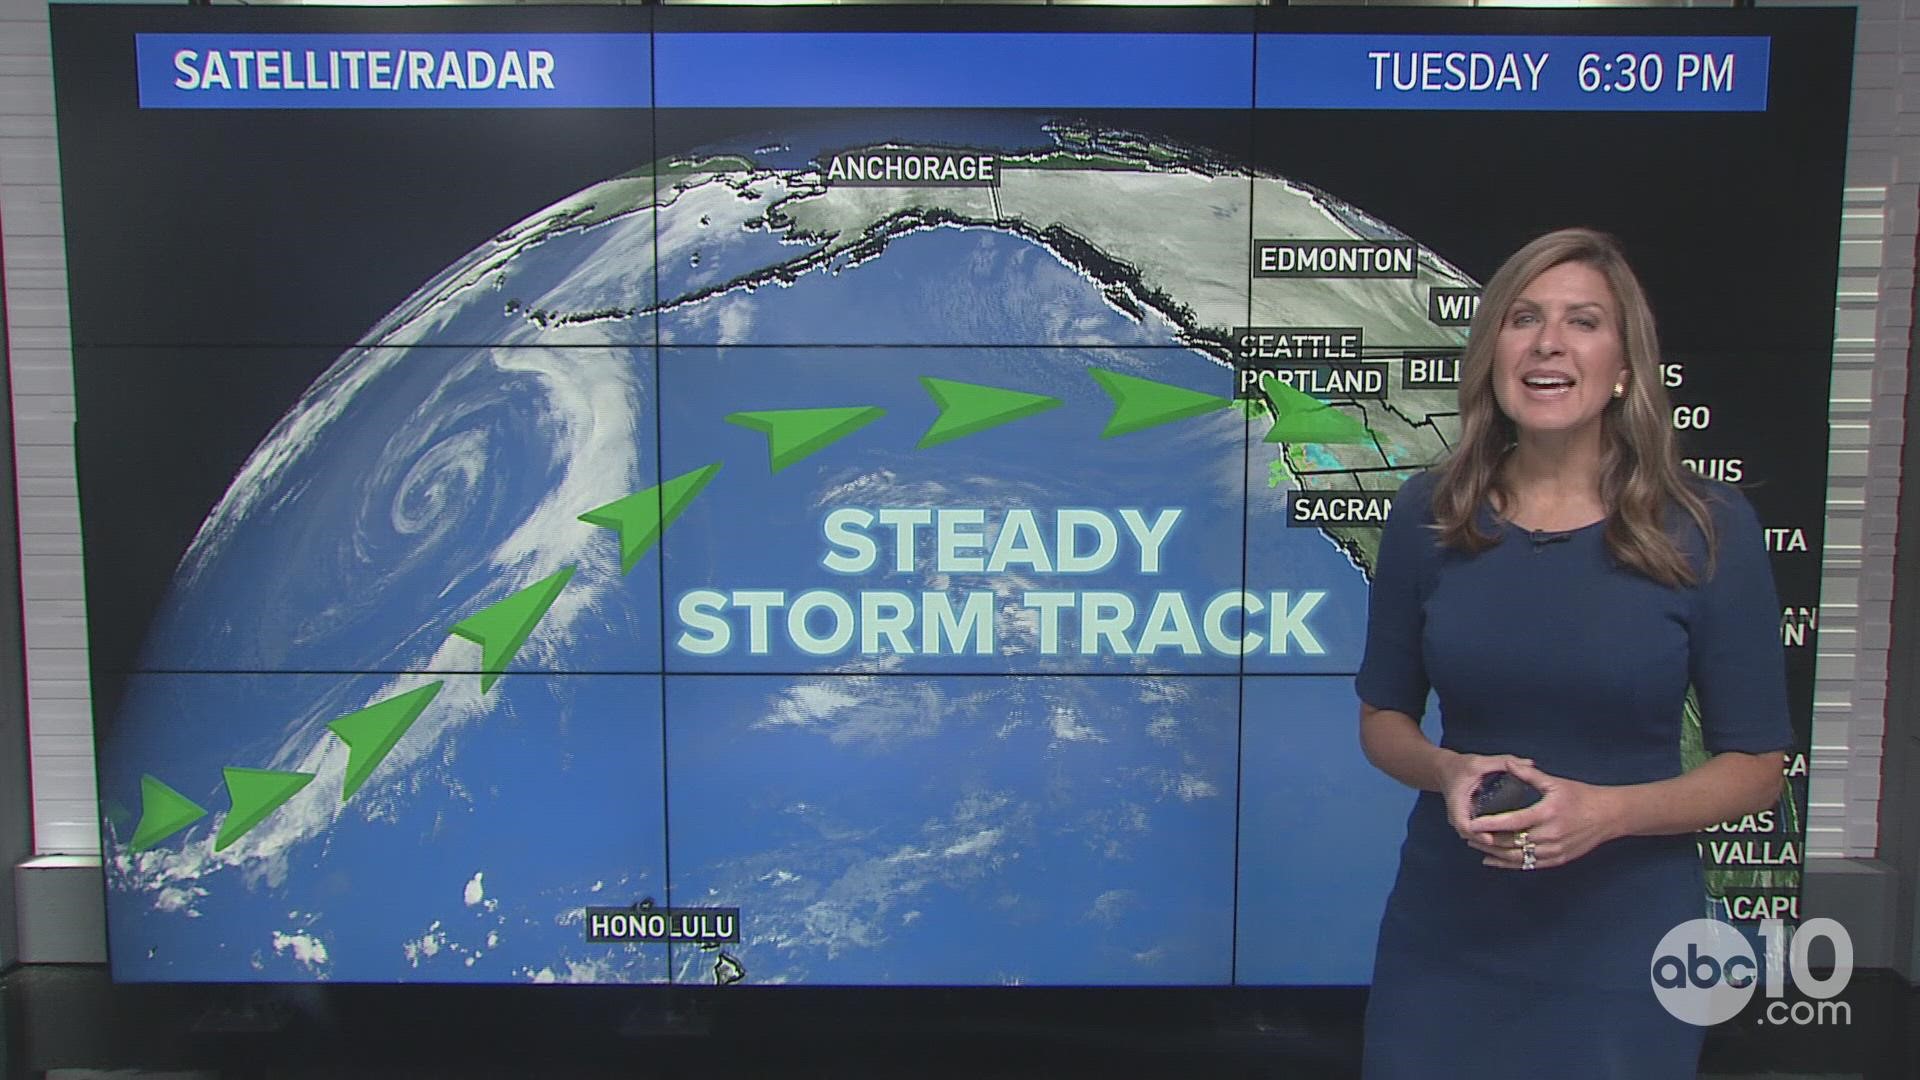 Periods of heavy rain and snow expected to impact travel through Northern California.